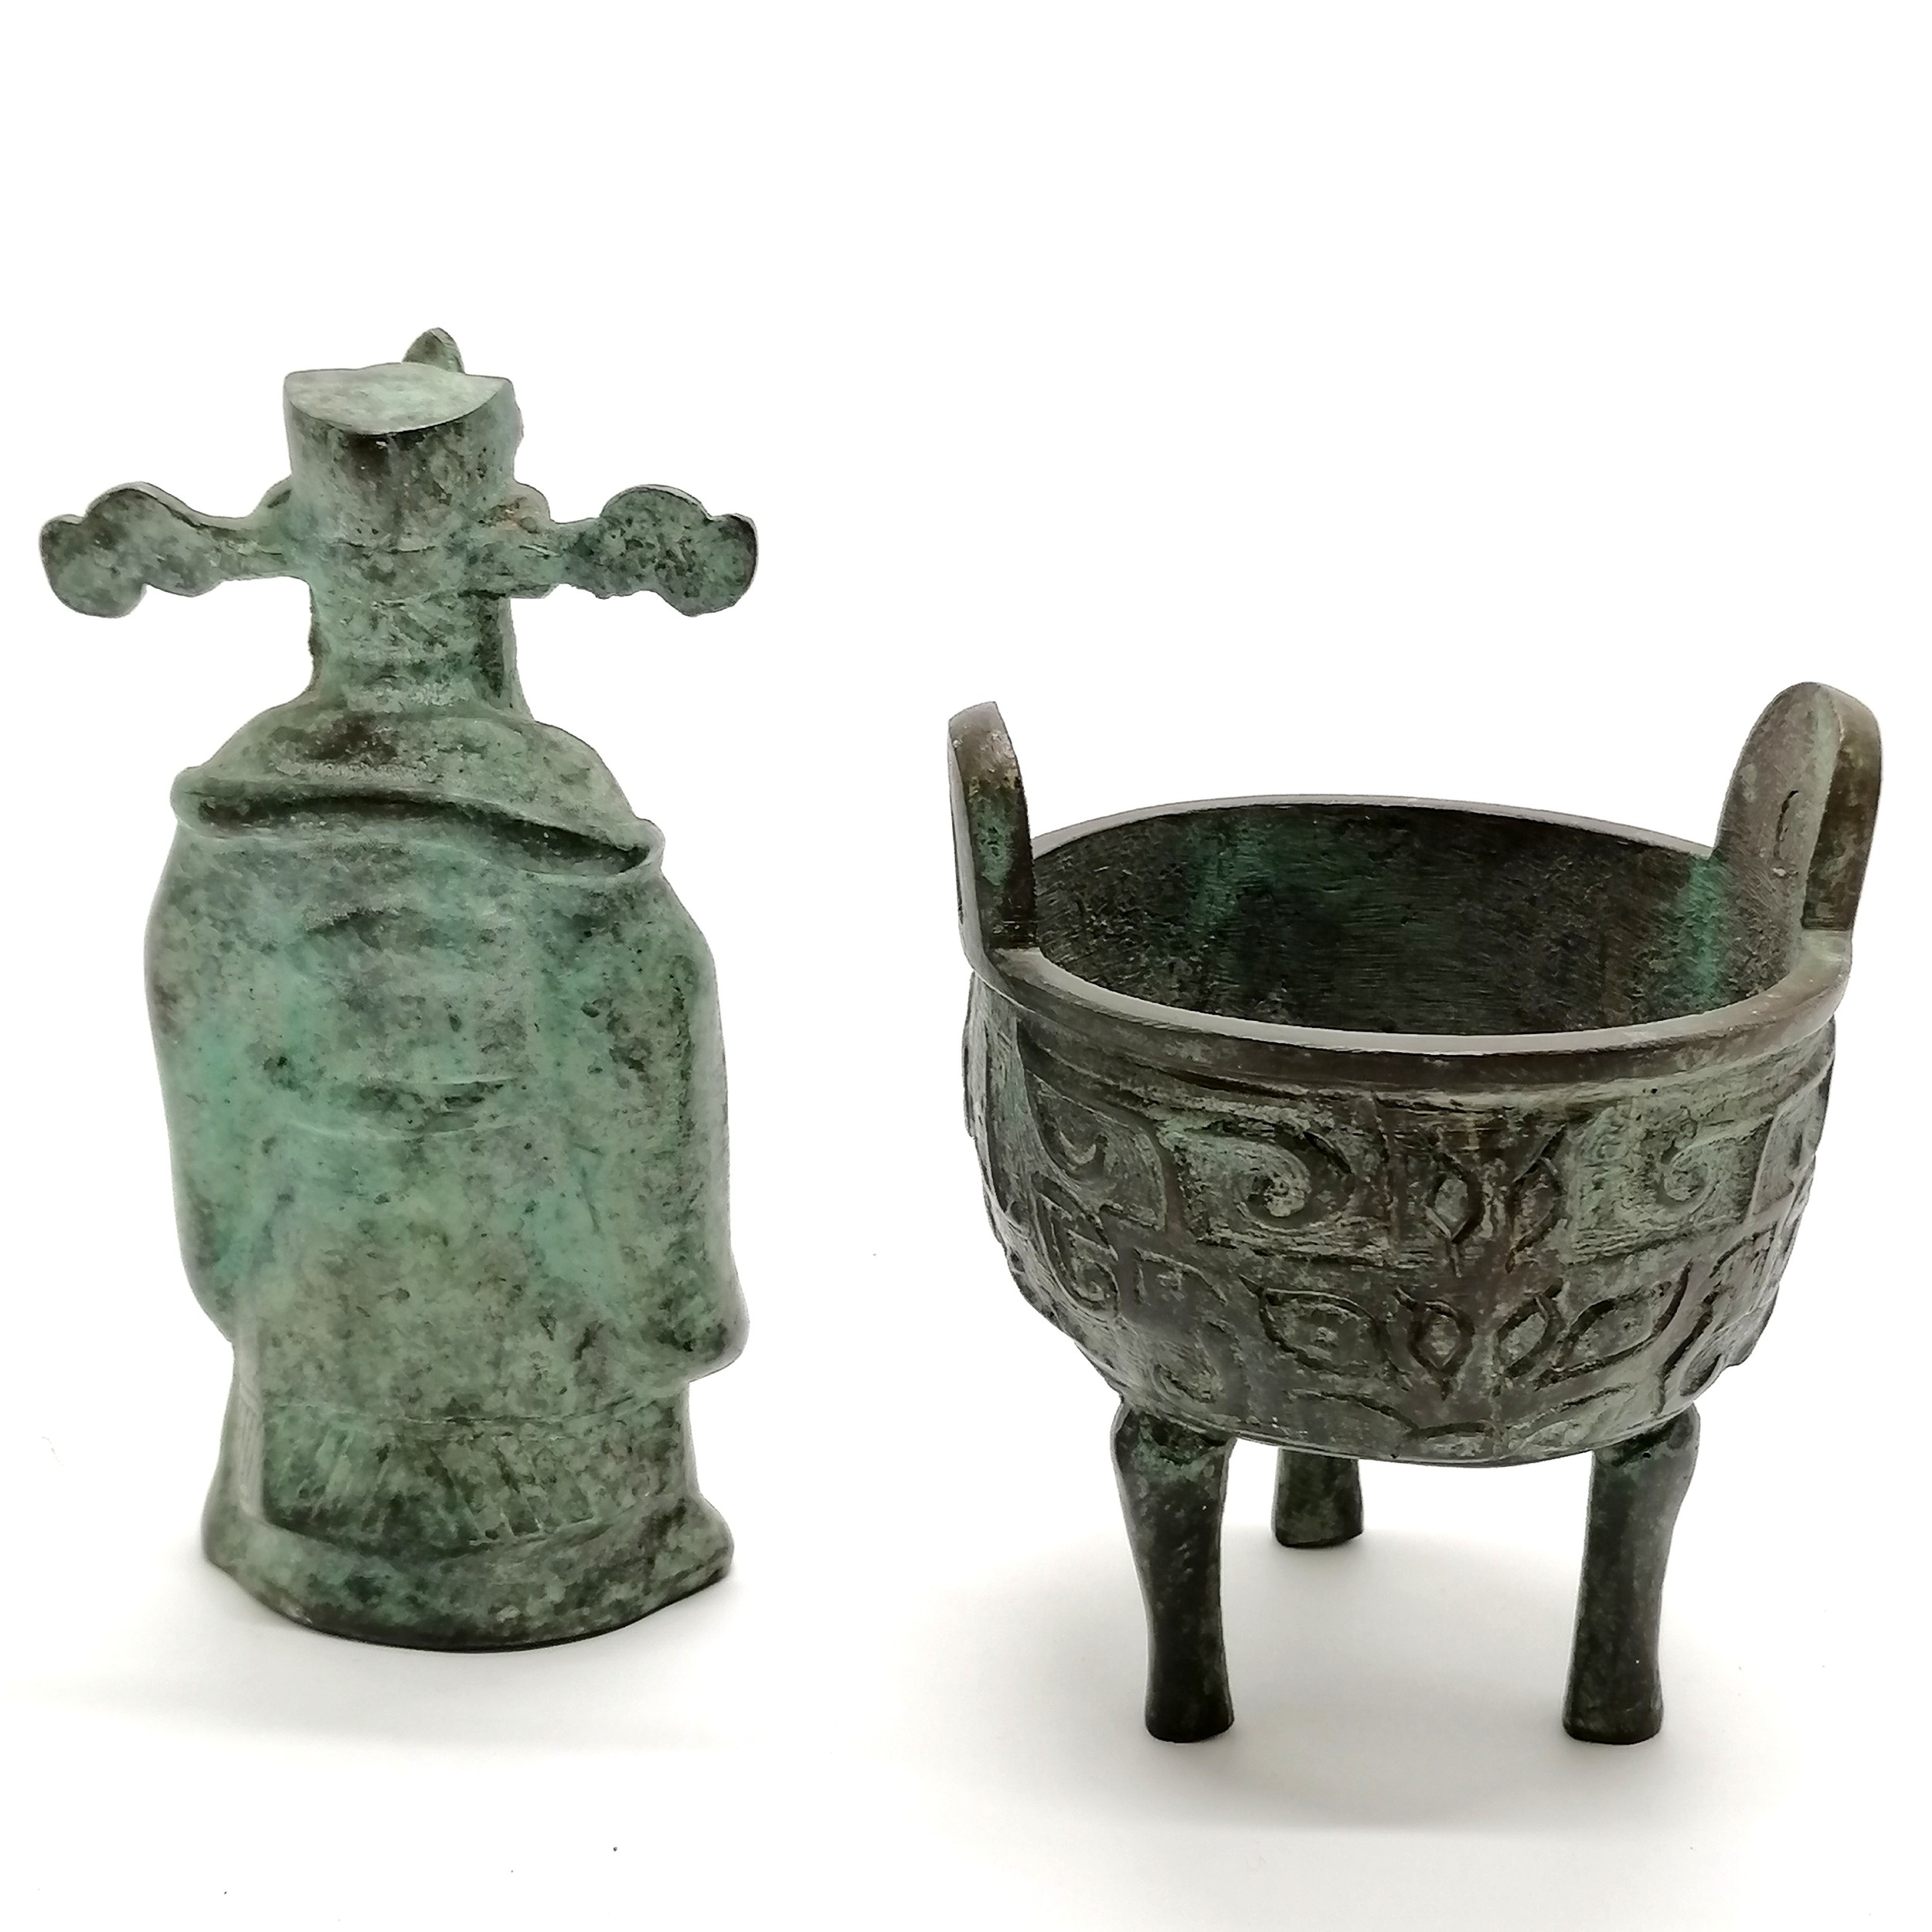 Chinese bronze cast censor & figure (15cm high) - Image 3 of 4